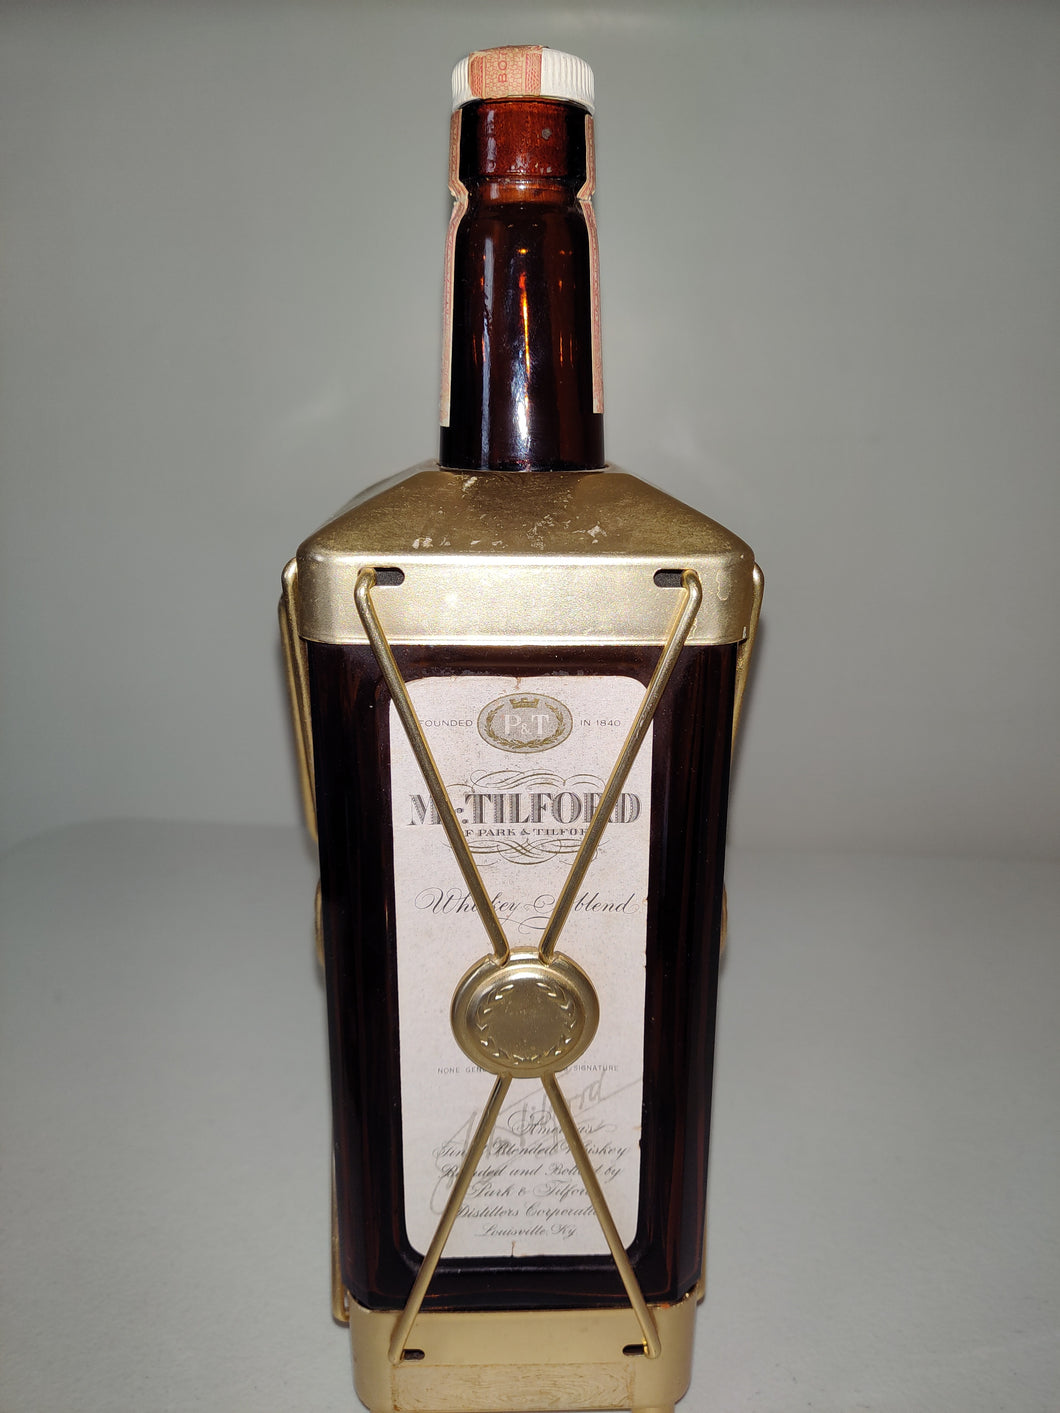 EMPTY Mr. Tilford Whiskey Bottle Decanter Music Box by Swiss Harmony